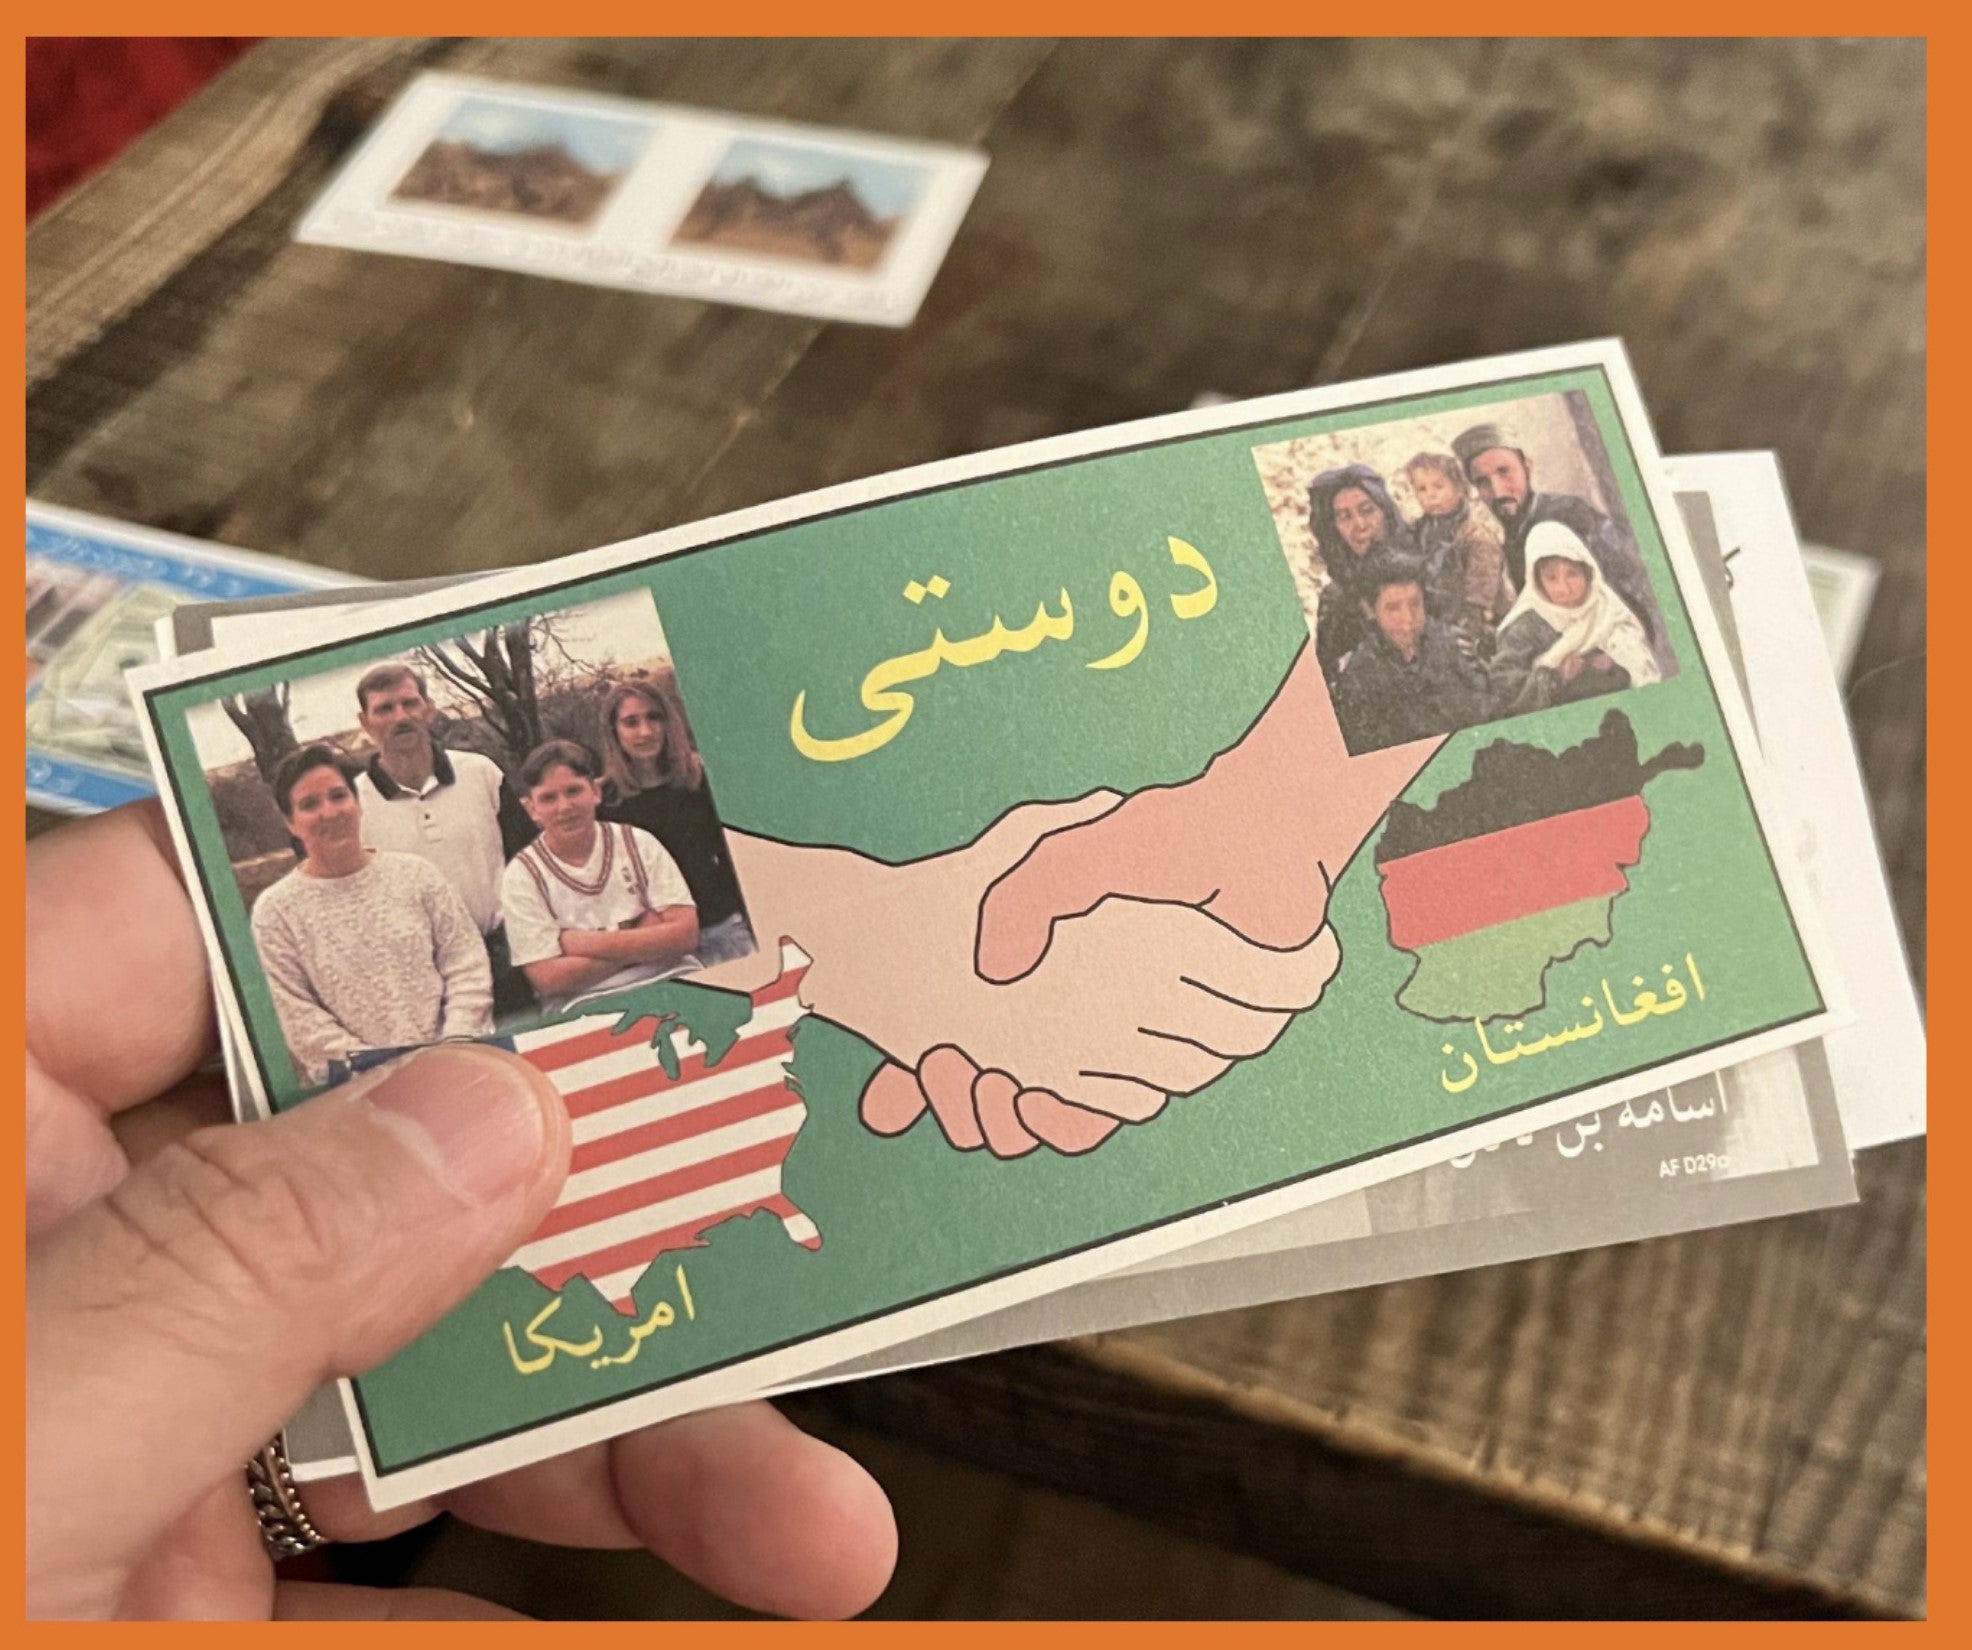 The leaflet shows a photo of an American family over an image of the United States, a photo of an Afghani family over an image of Afghanistan, and a drawing of two hands clasping each other in the center.